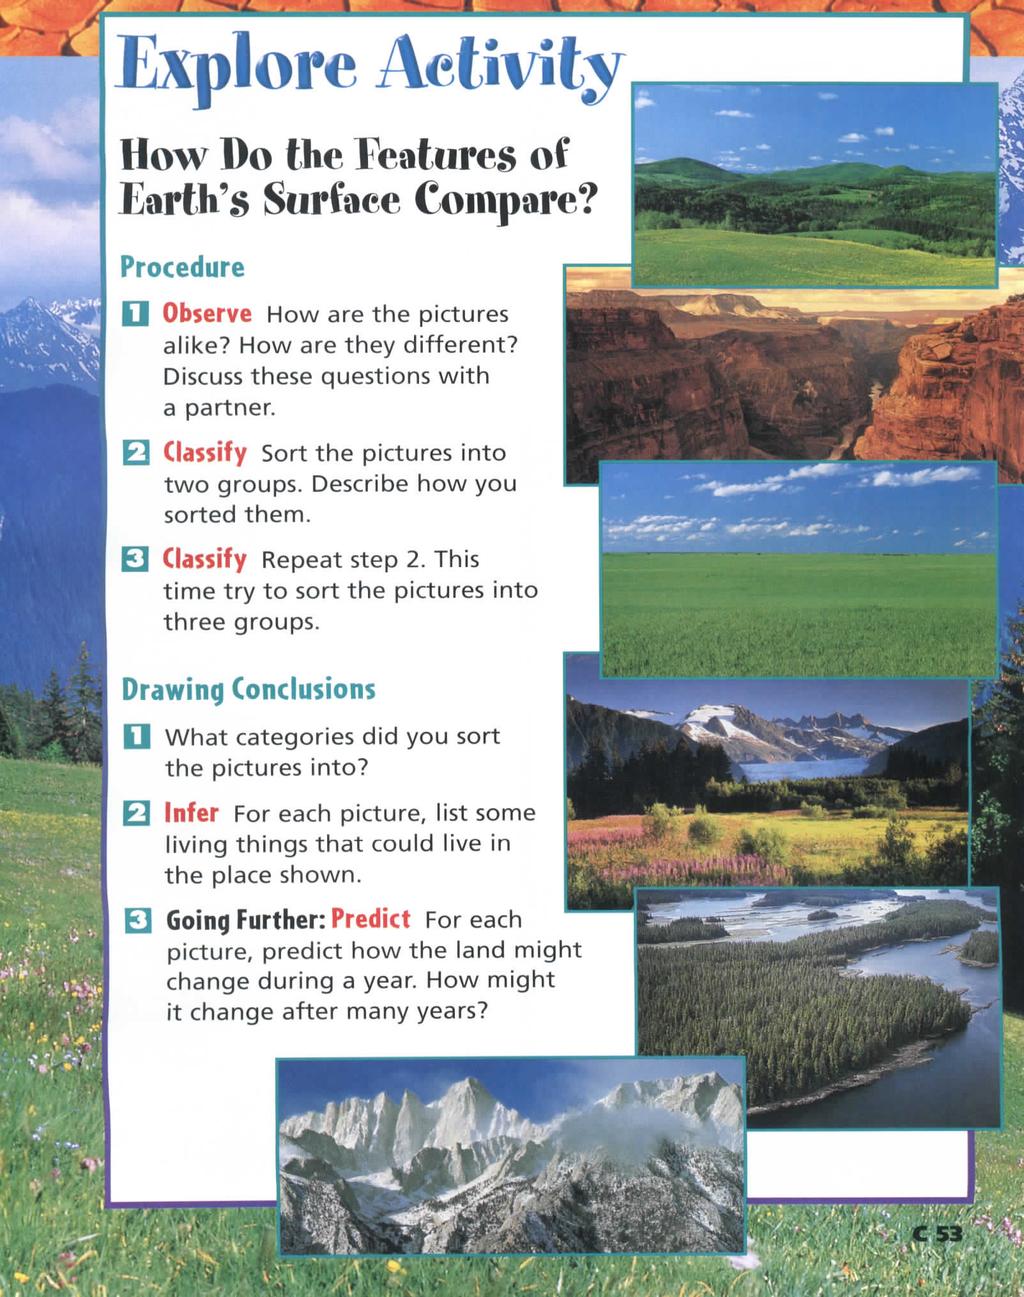 Explore Activity. How Do the Features of Earth's Surface Compare? Procedure Q Observe How are the pictures alike? How are they different? Discuss these questions with a partner.